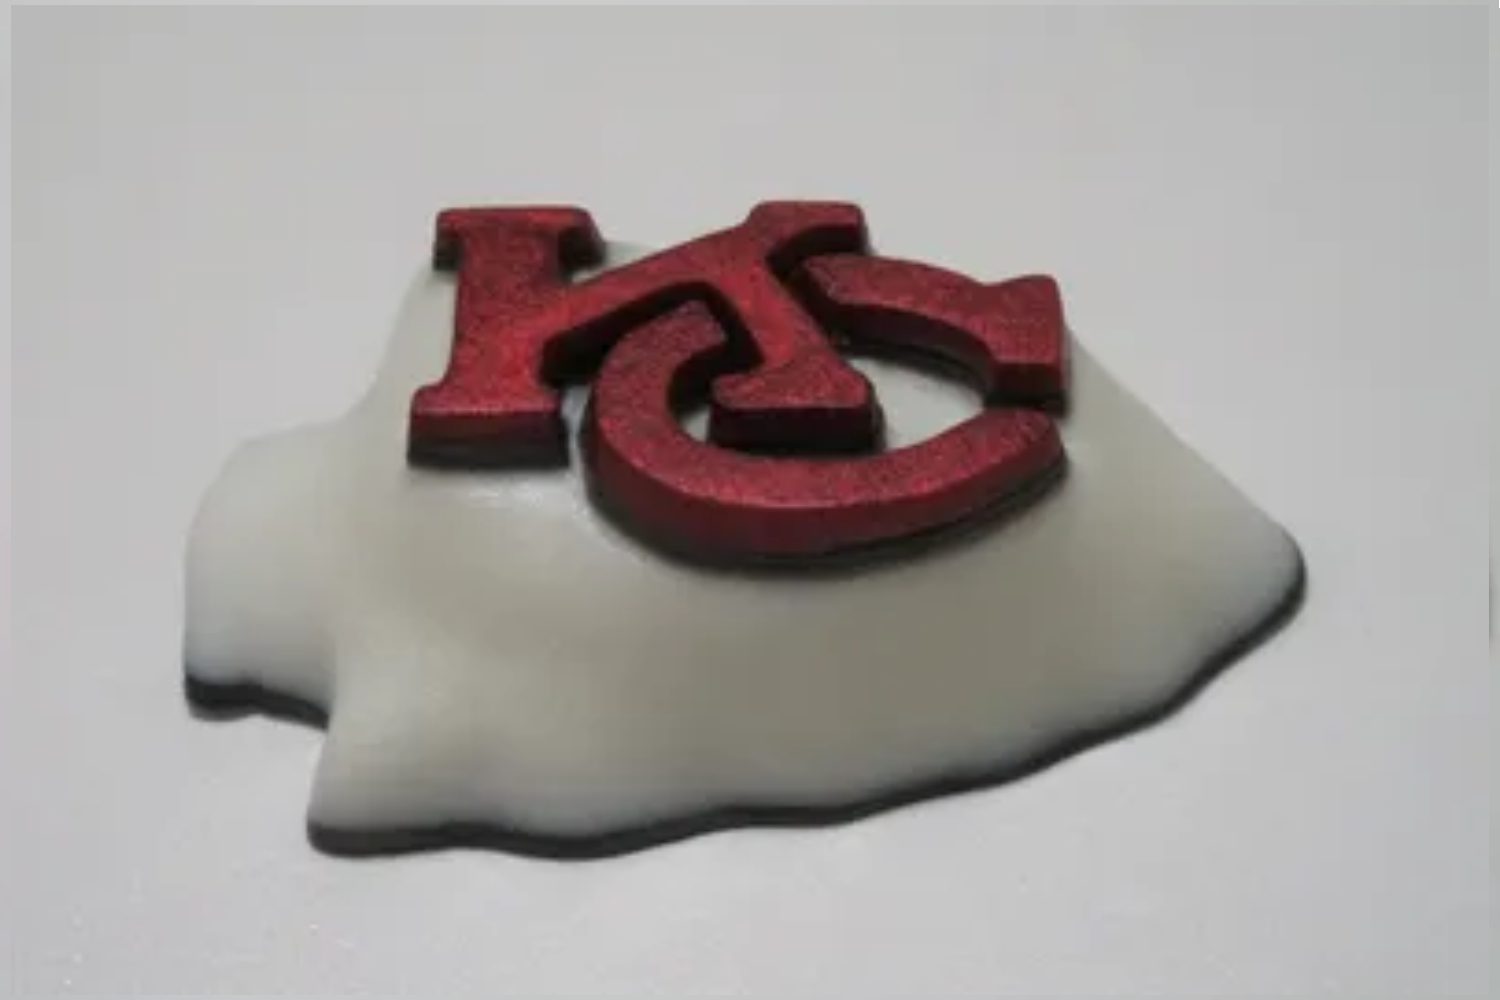 A red and white clay piece of paper with the kansas state logo on it.